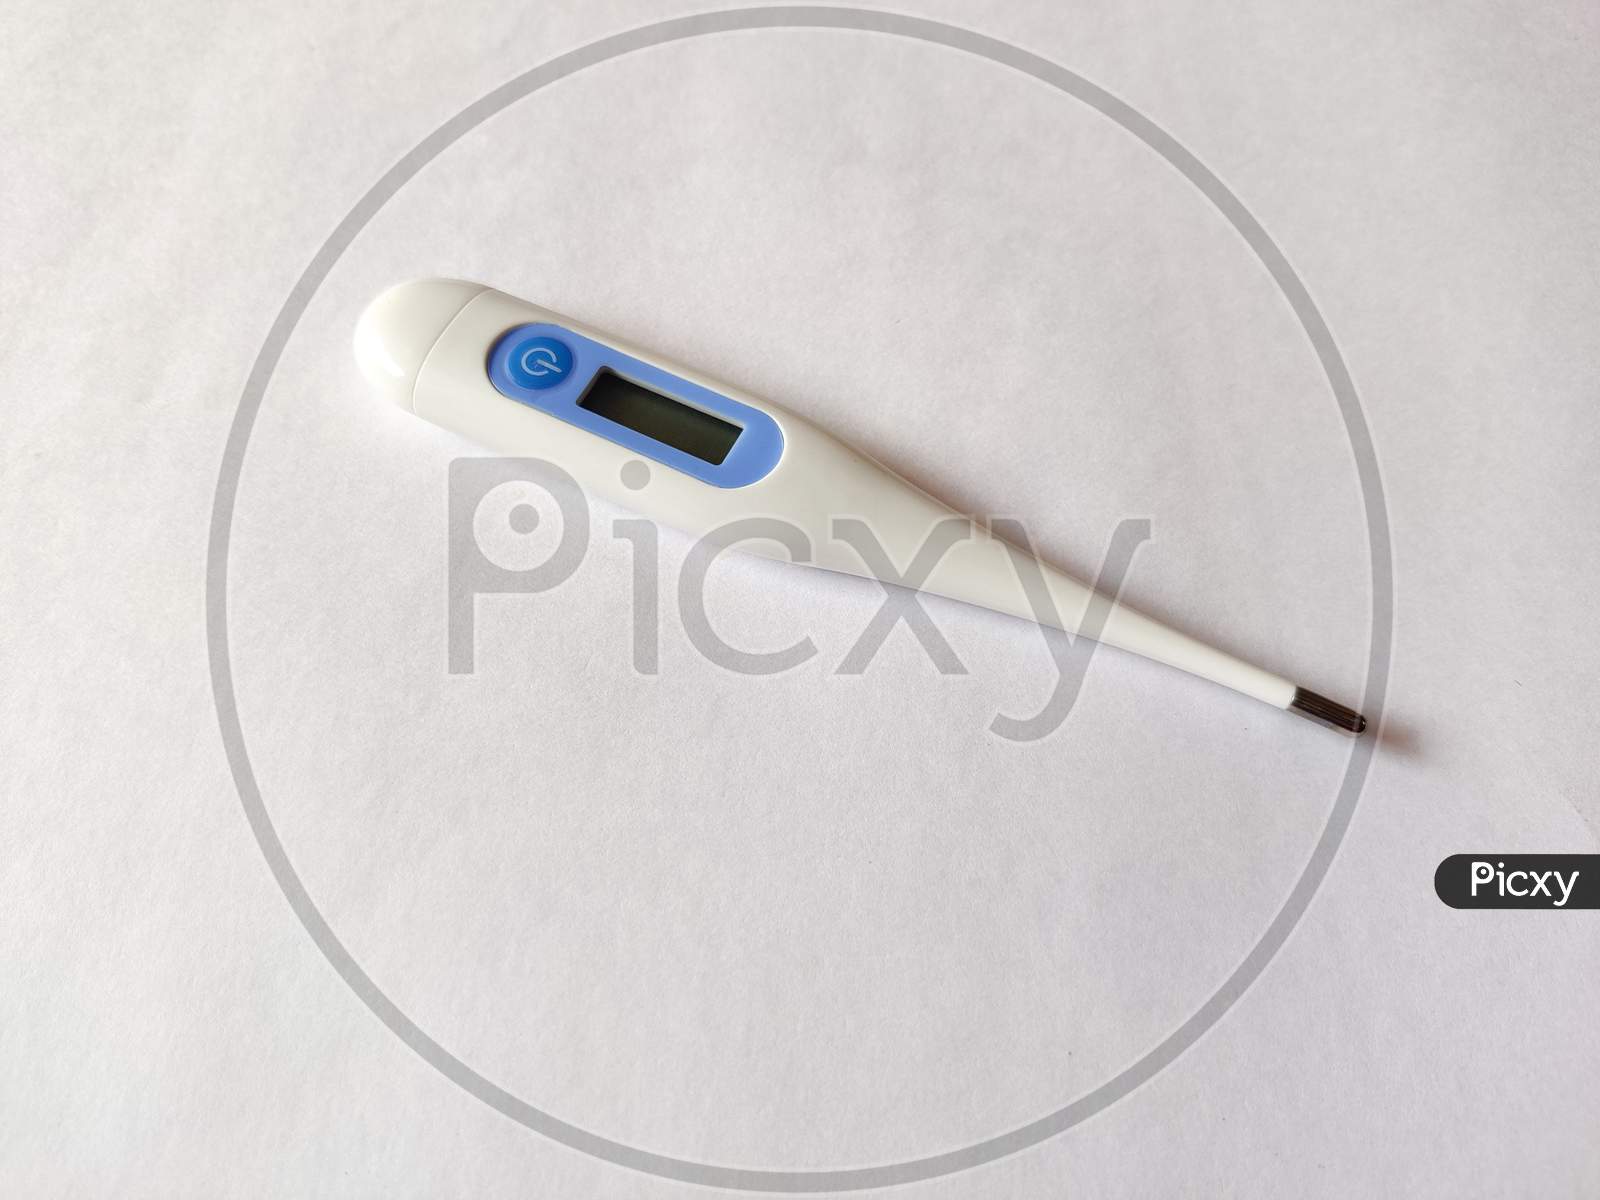 Digital Thermometer For Measuring Temperature. Isolated On White background